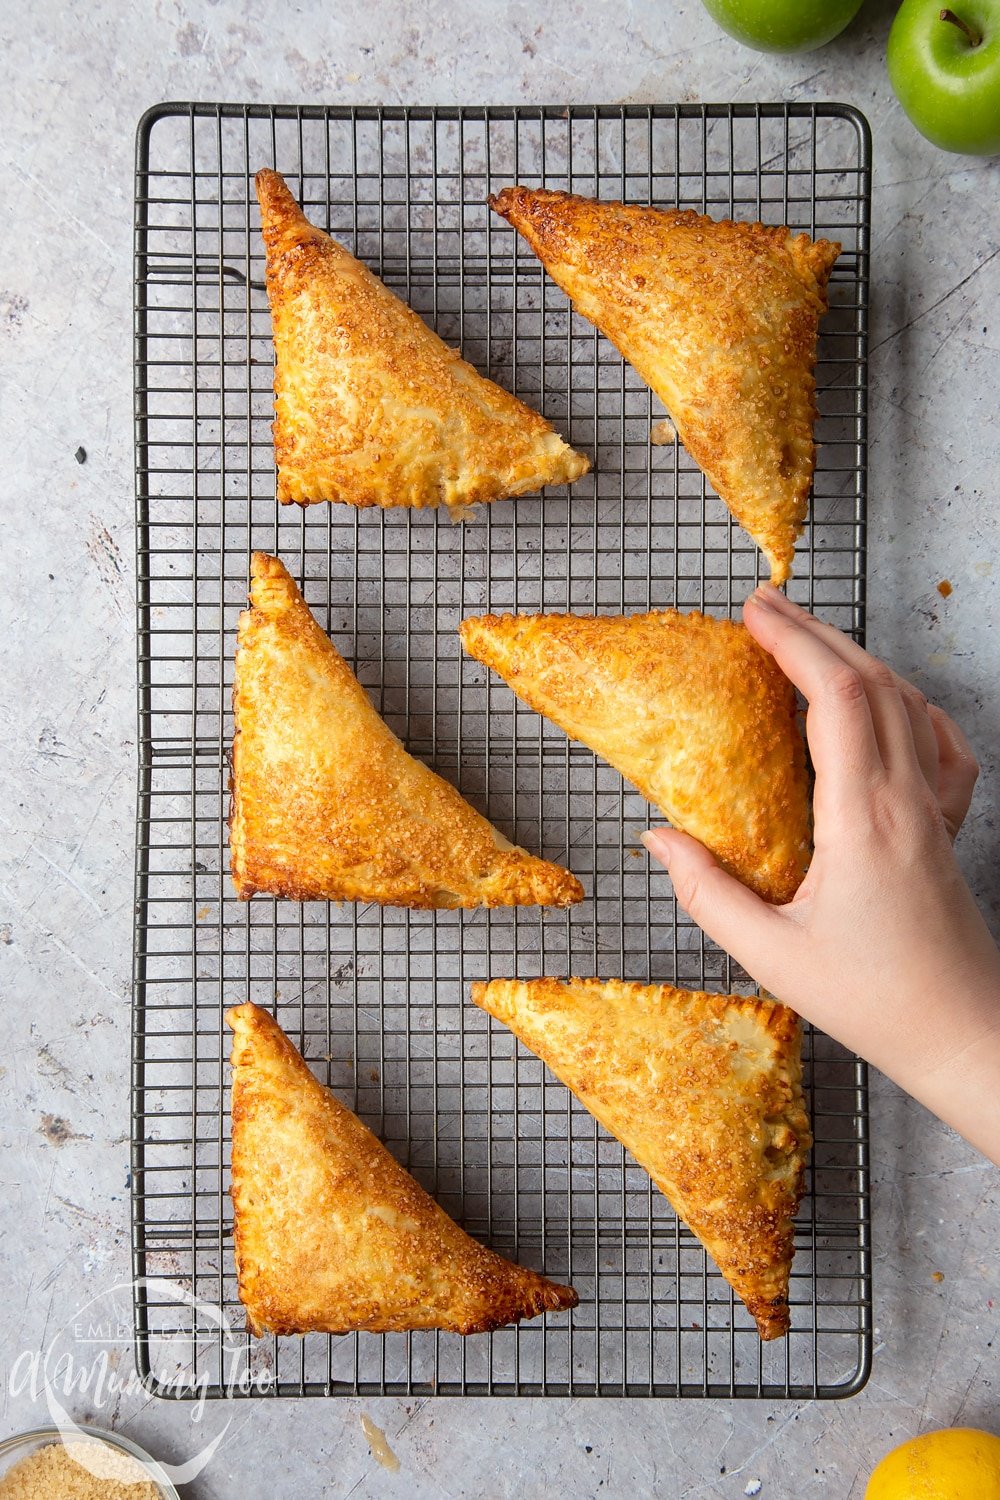 Overhead shot of a hand touching an Apple cinnamon turnover on a baking rack with other apple turnovers